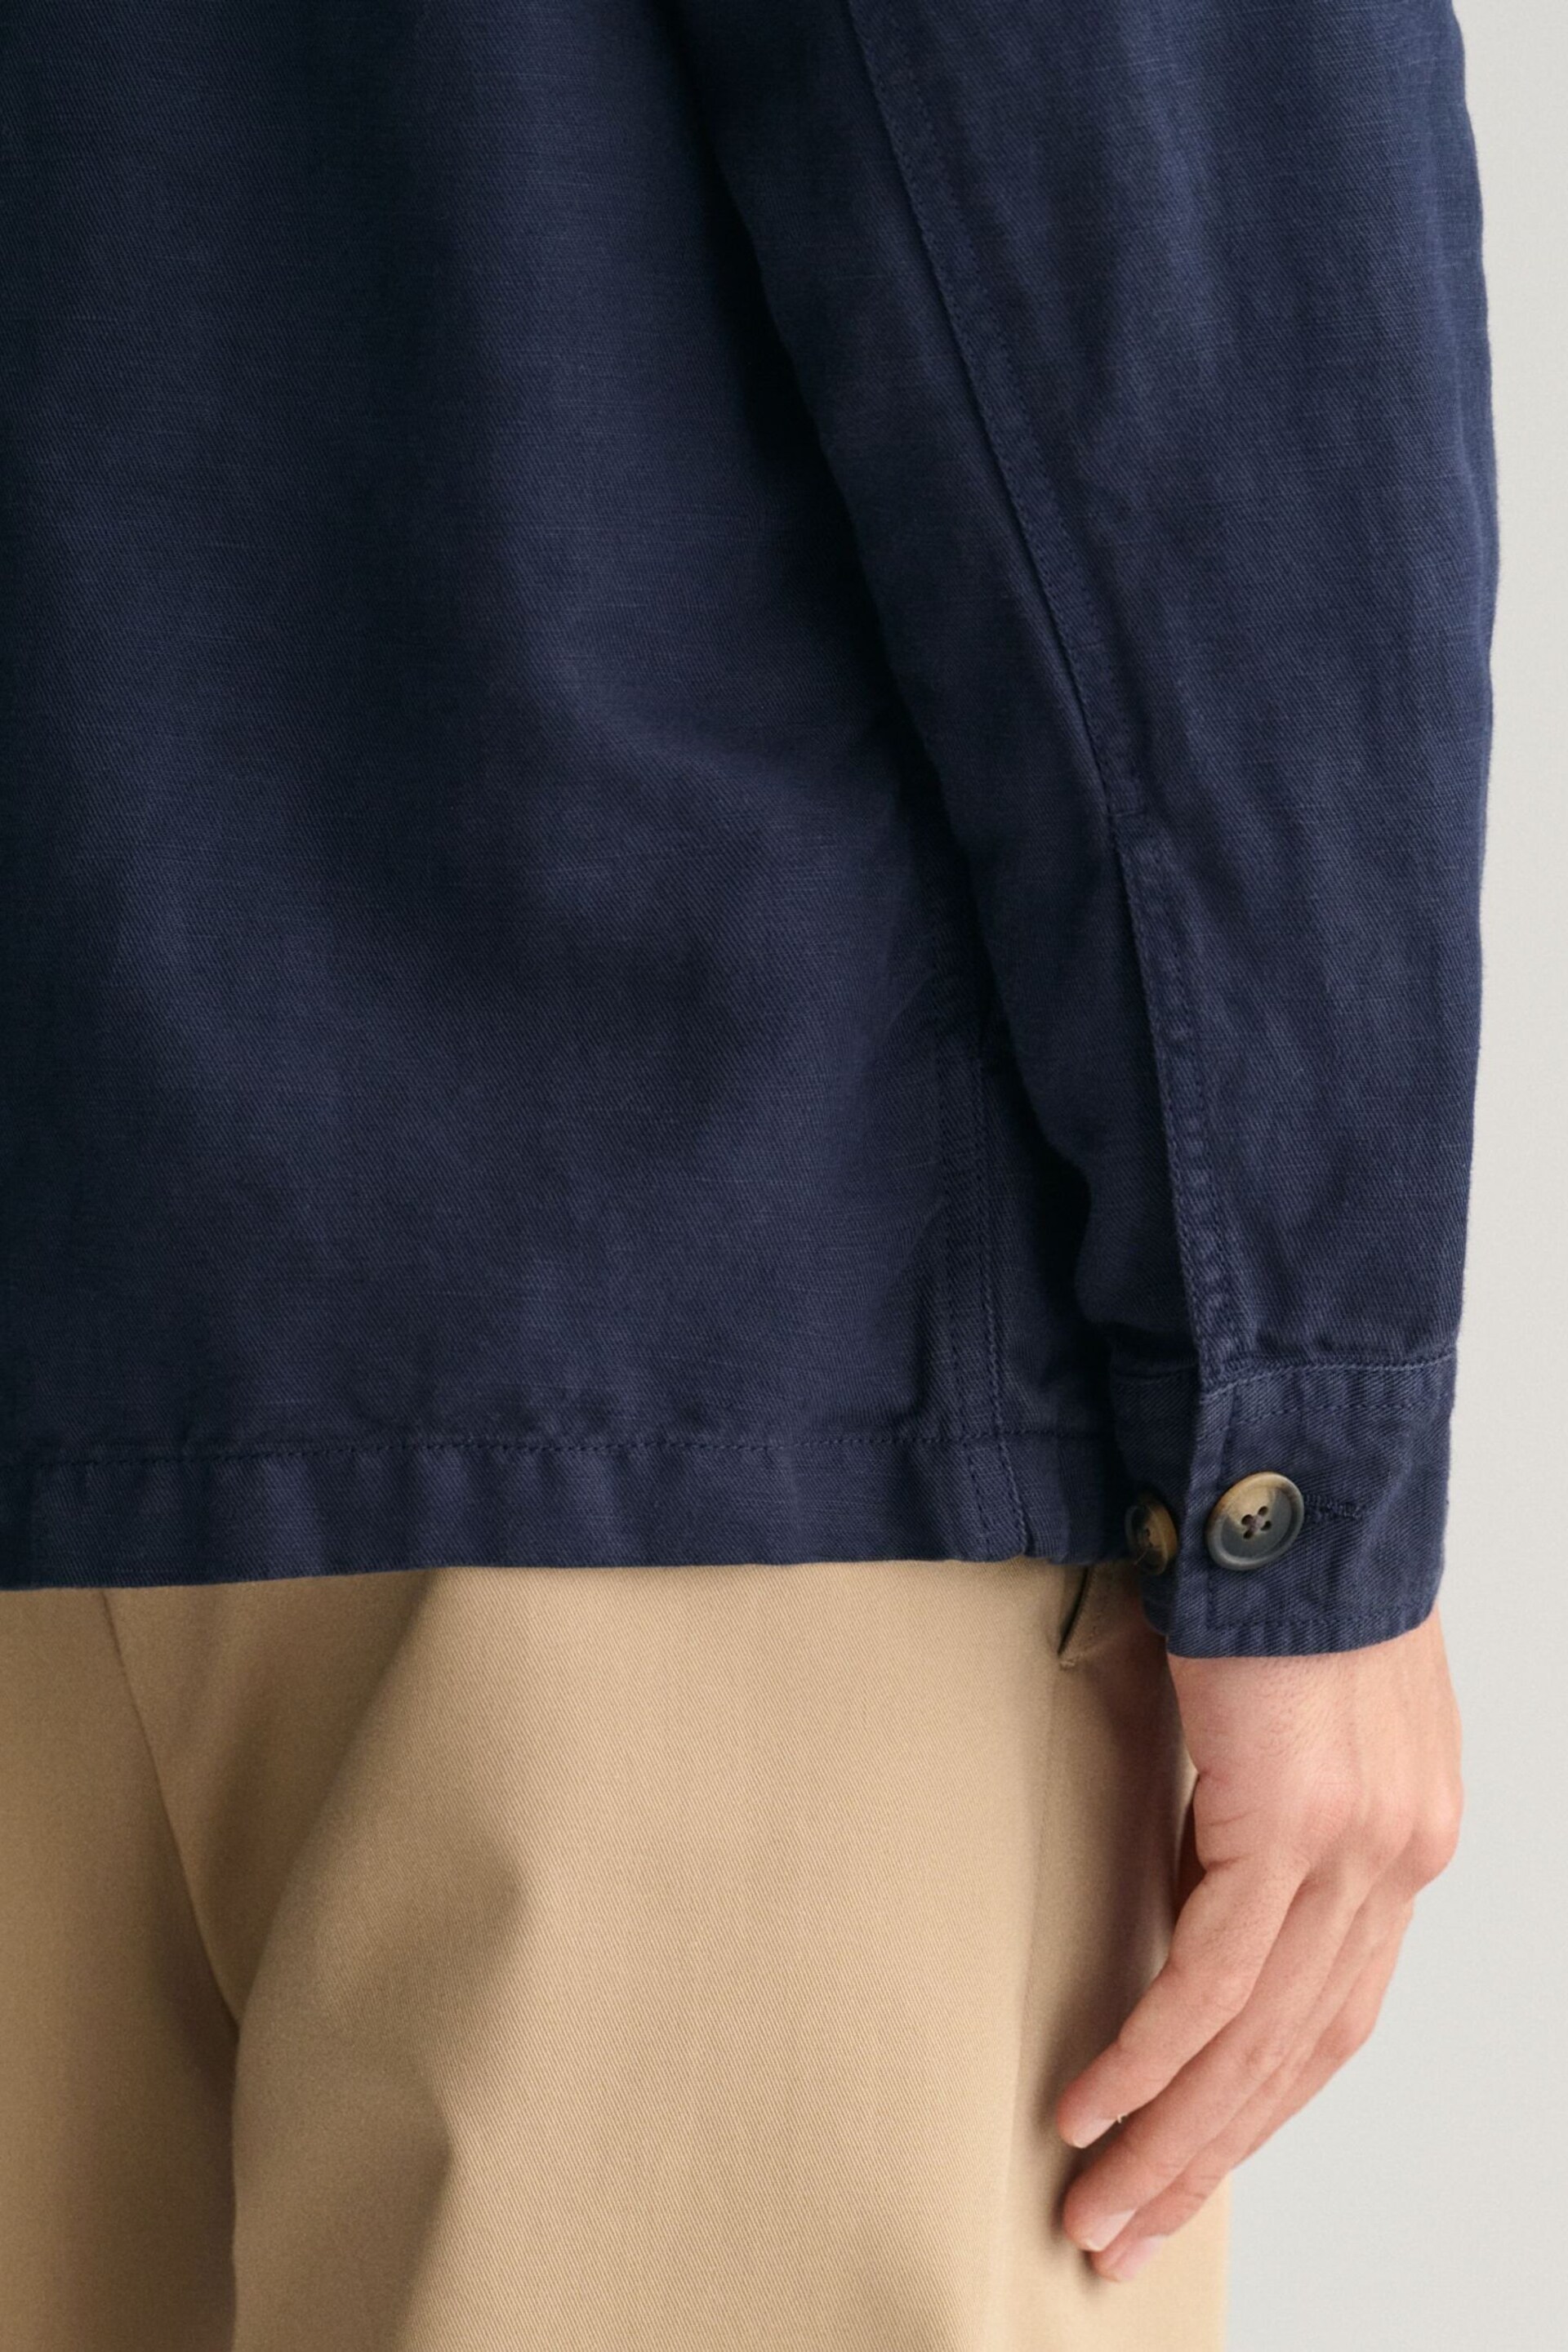 GANT Relaxed Fit Cotton Linen Twill Overshirt - Image 5 of 7